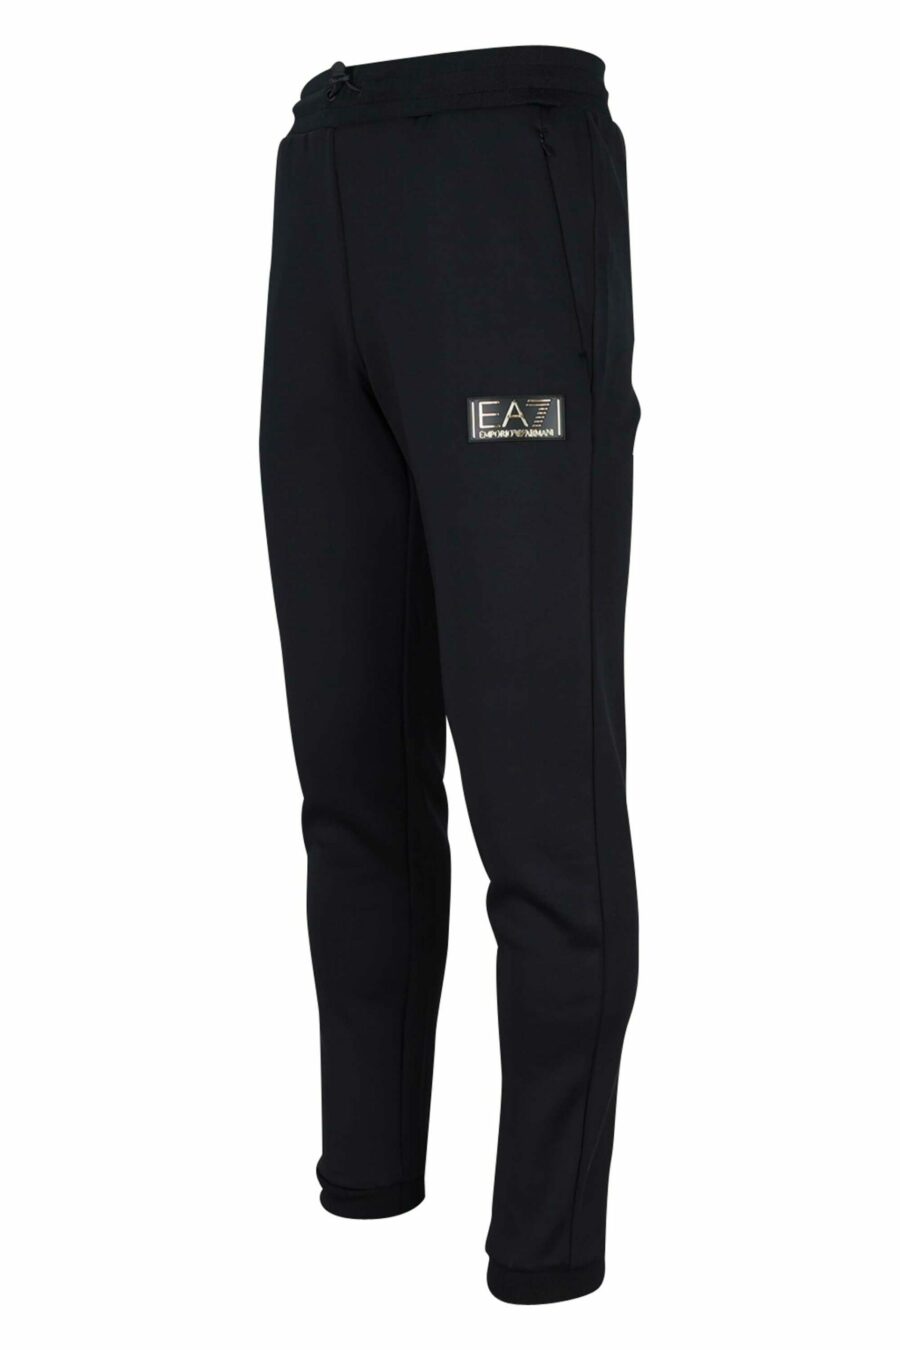 Tracksuit bottoms black with gold "lux identity" logo plaque - 8056787947160 1 scaled